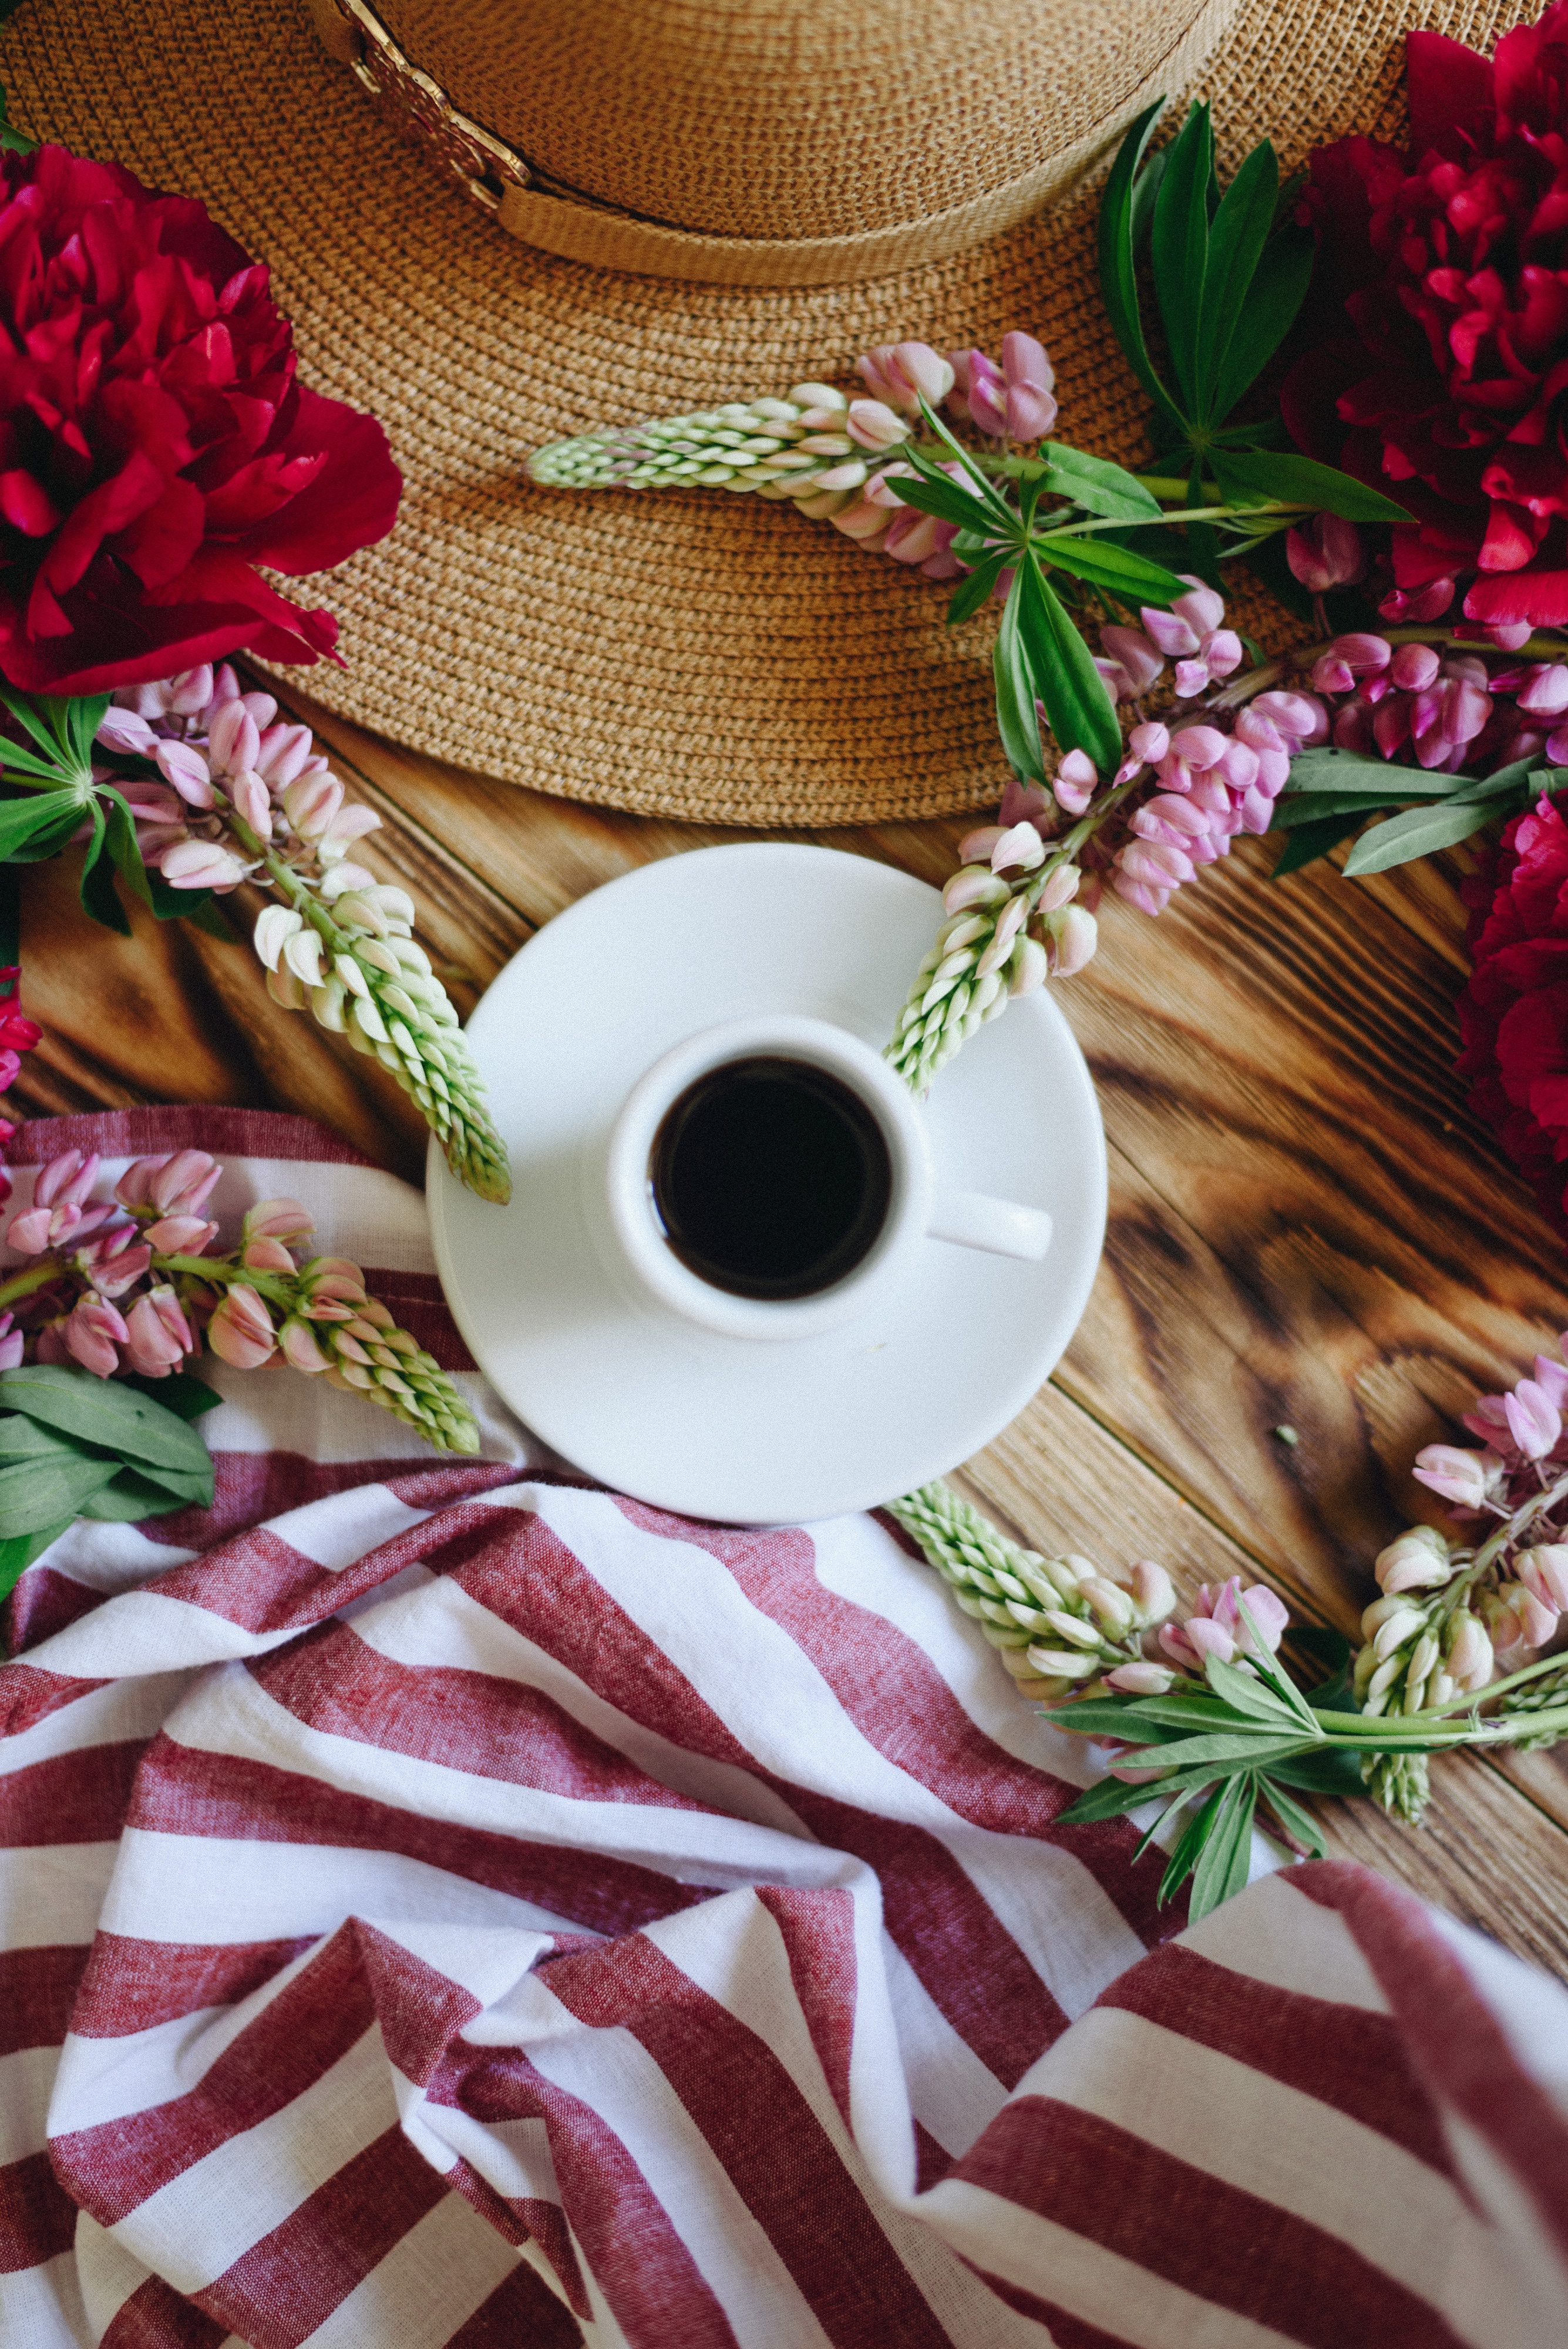 cup, hat, flowers, food, table download HD wallpaper